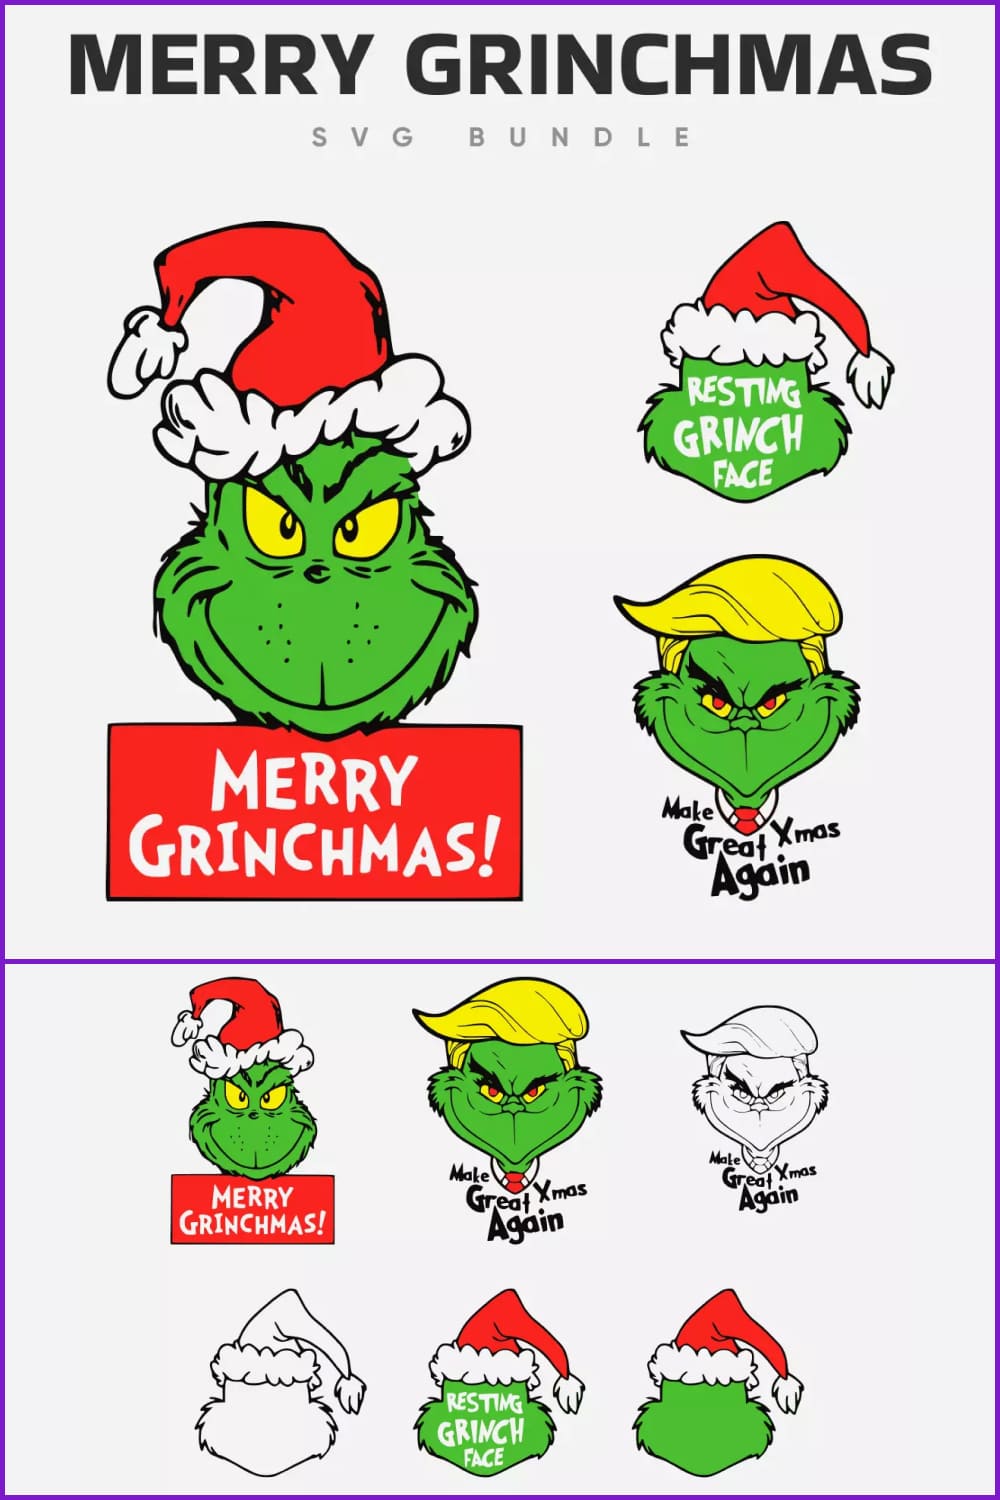 Merry Grinchmas images.